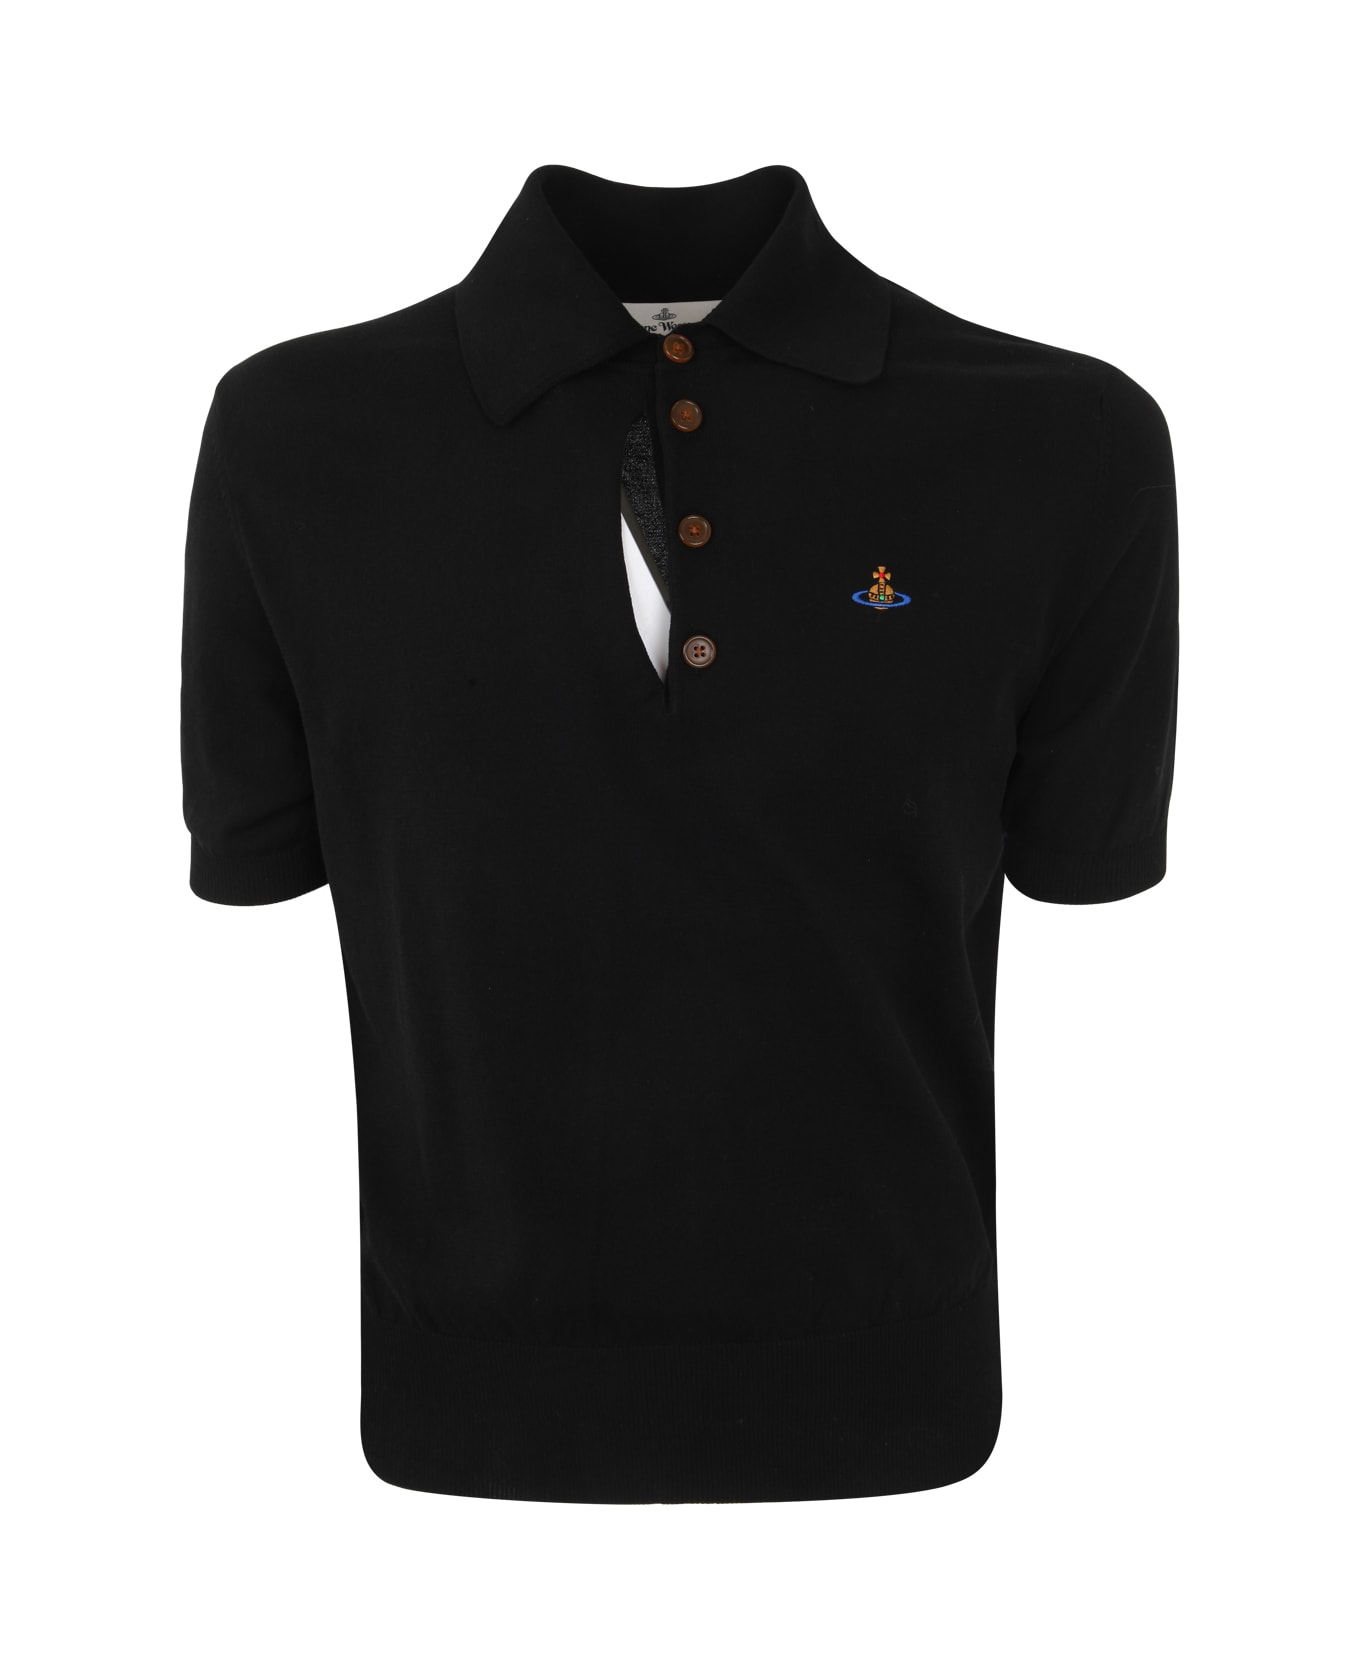 Vivienne Westwood Ripped Polo - Black